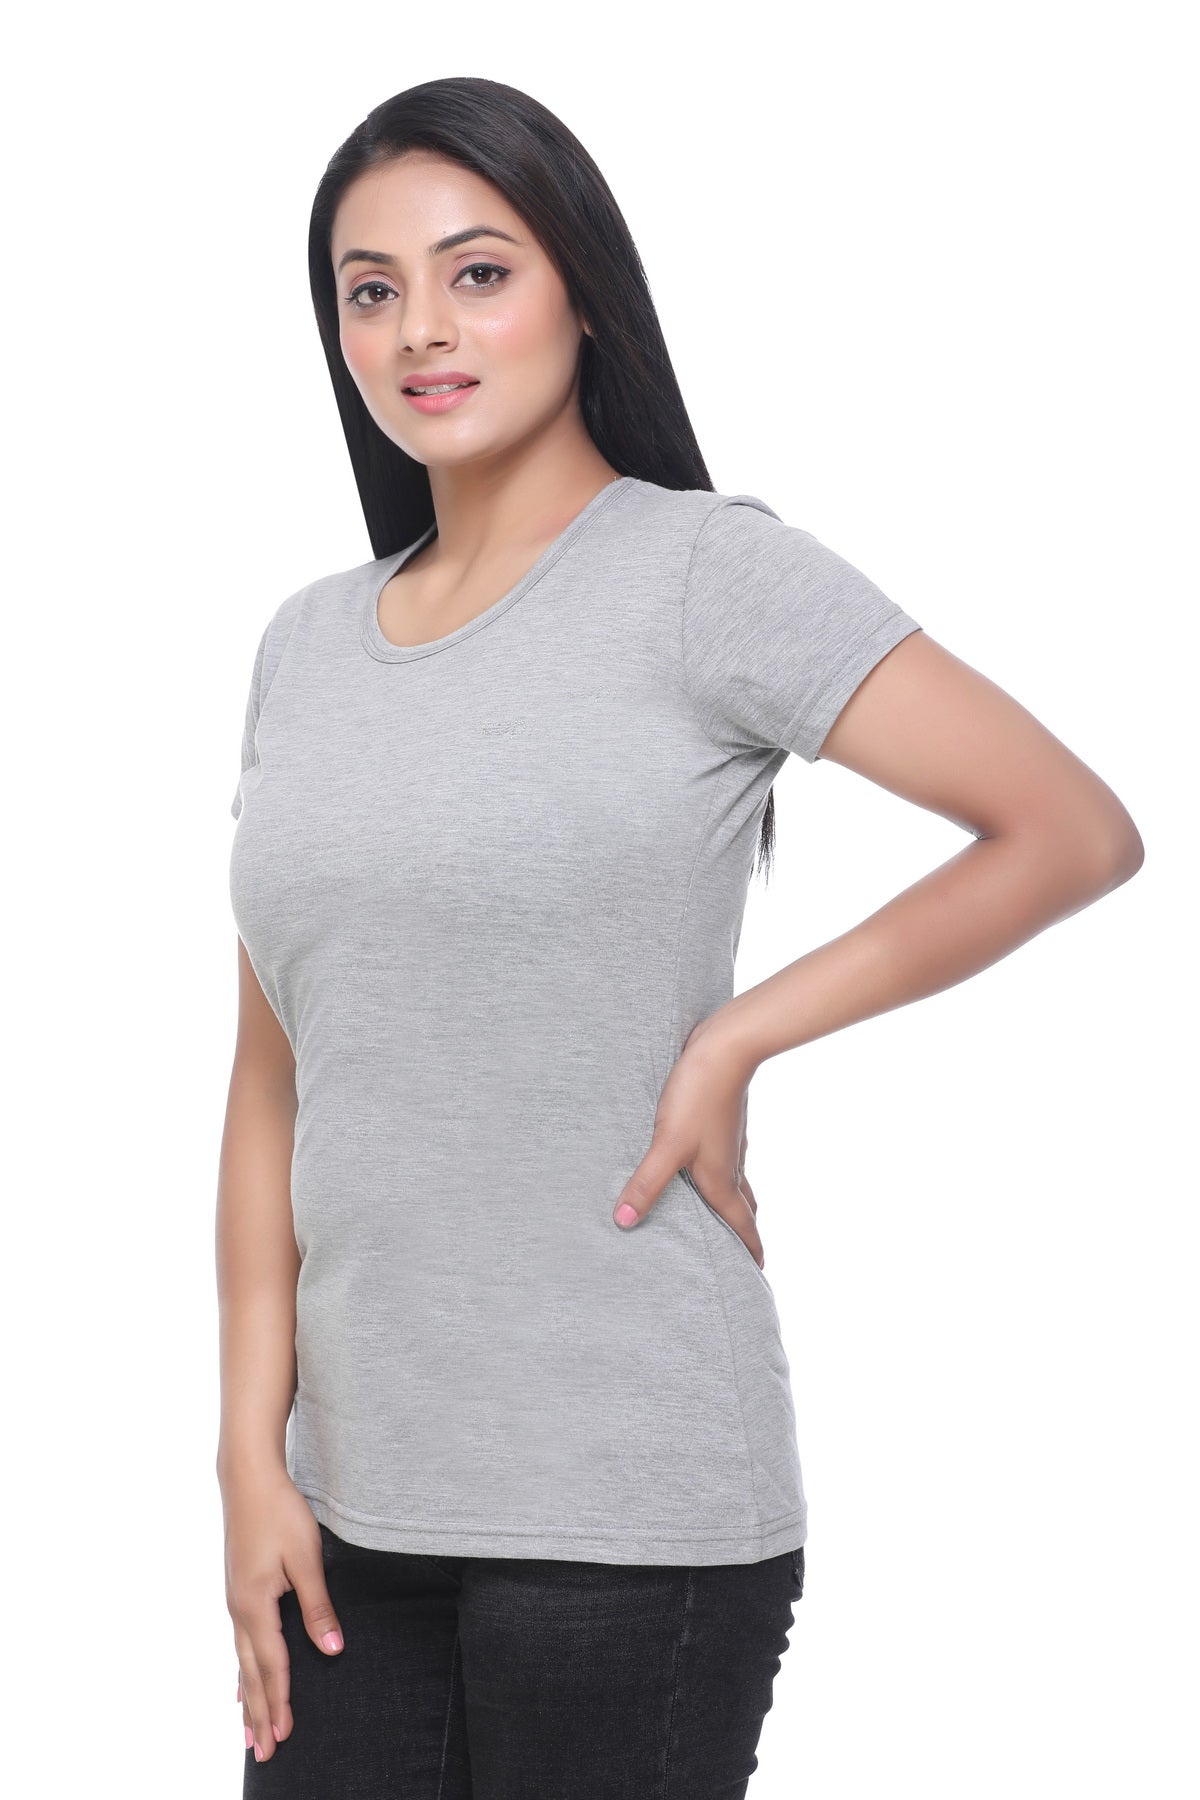 CUPID  Round Neck Plain Summers Cotton T-Shirt For Women/Girls (Grey) freeshipping - Cupid Clothings